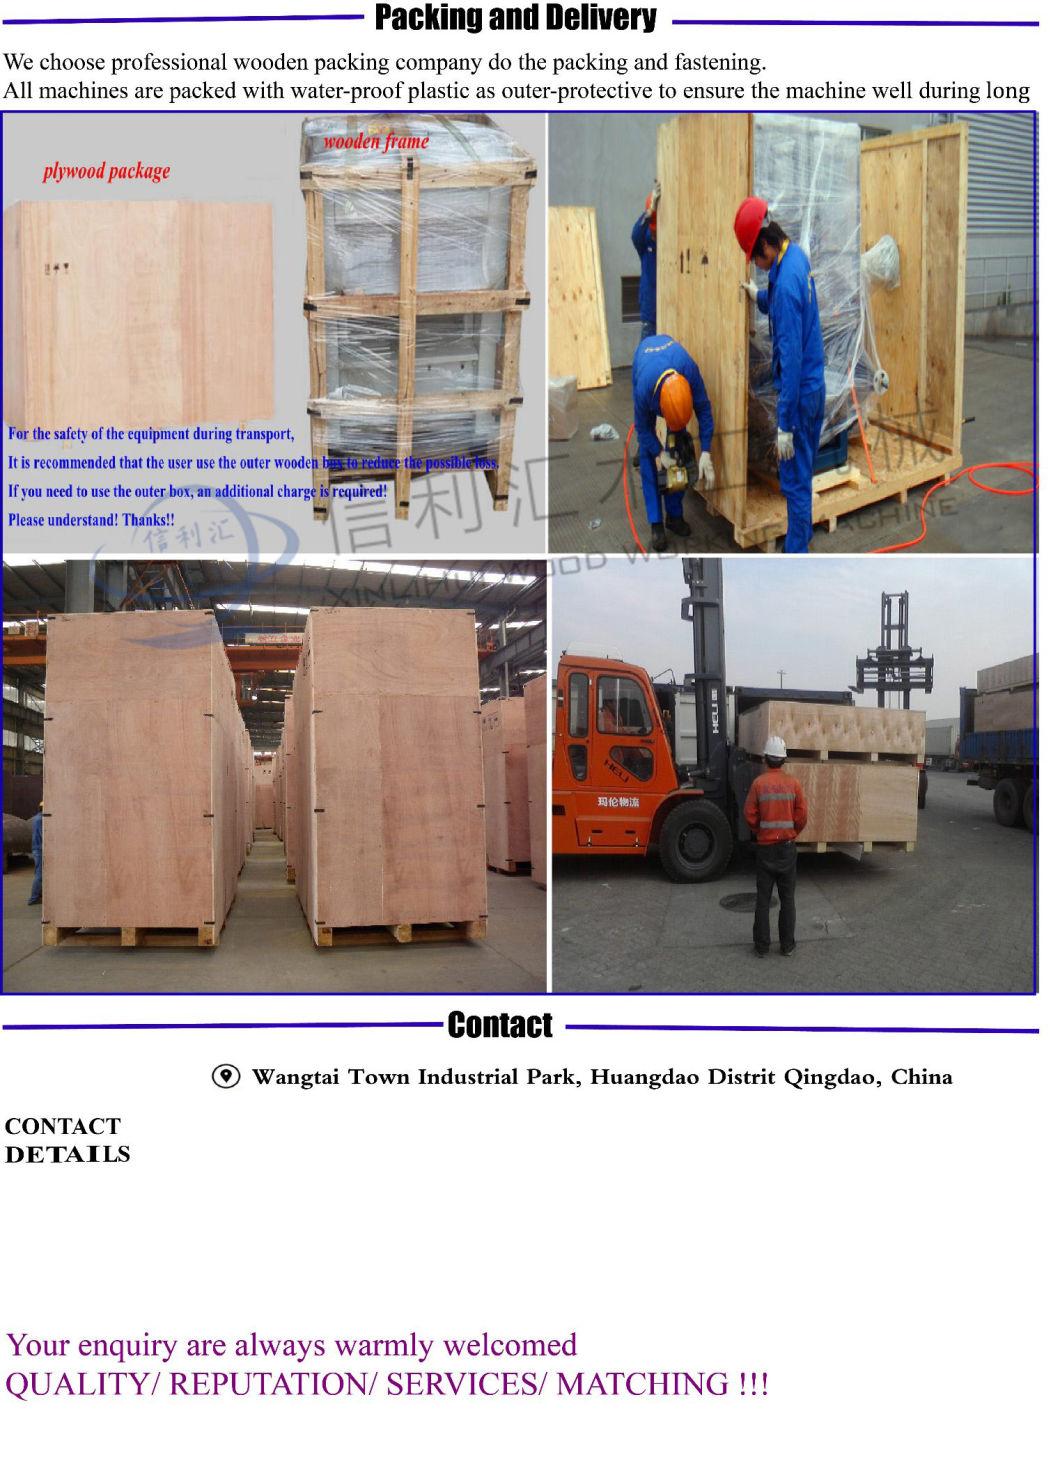 Automatic Horizontal Band Saw Thin-Wood Board Horizontal Band Saw Gantry Horizontal Band Saw Woodworking Sheet Band Saw a Vacuum Table, Dust Collection System,